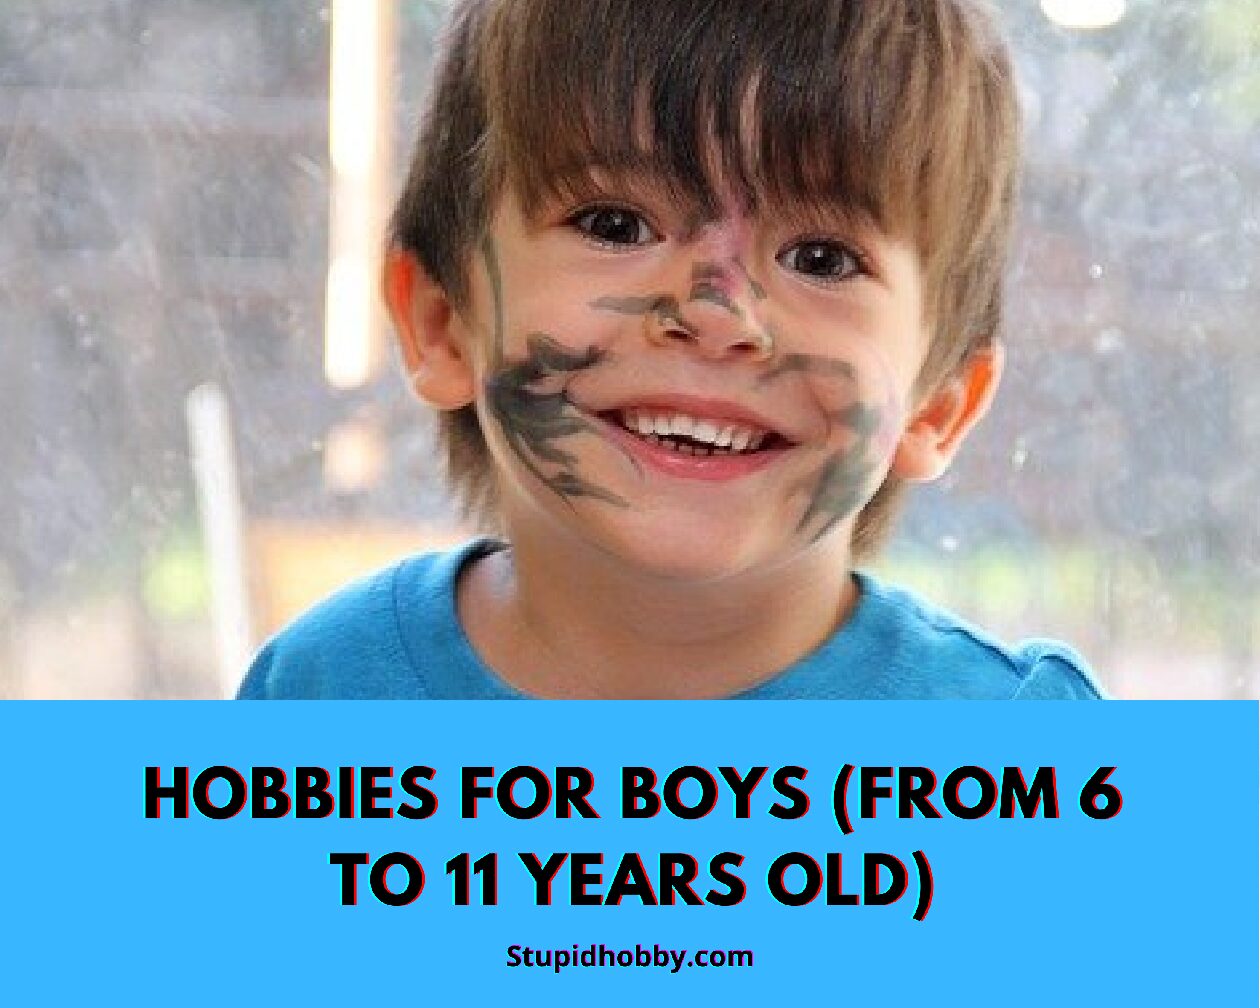 Hobbies For Boys (from 6 to 11 years old)